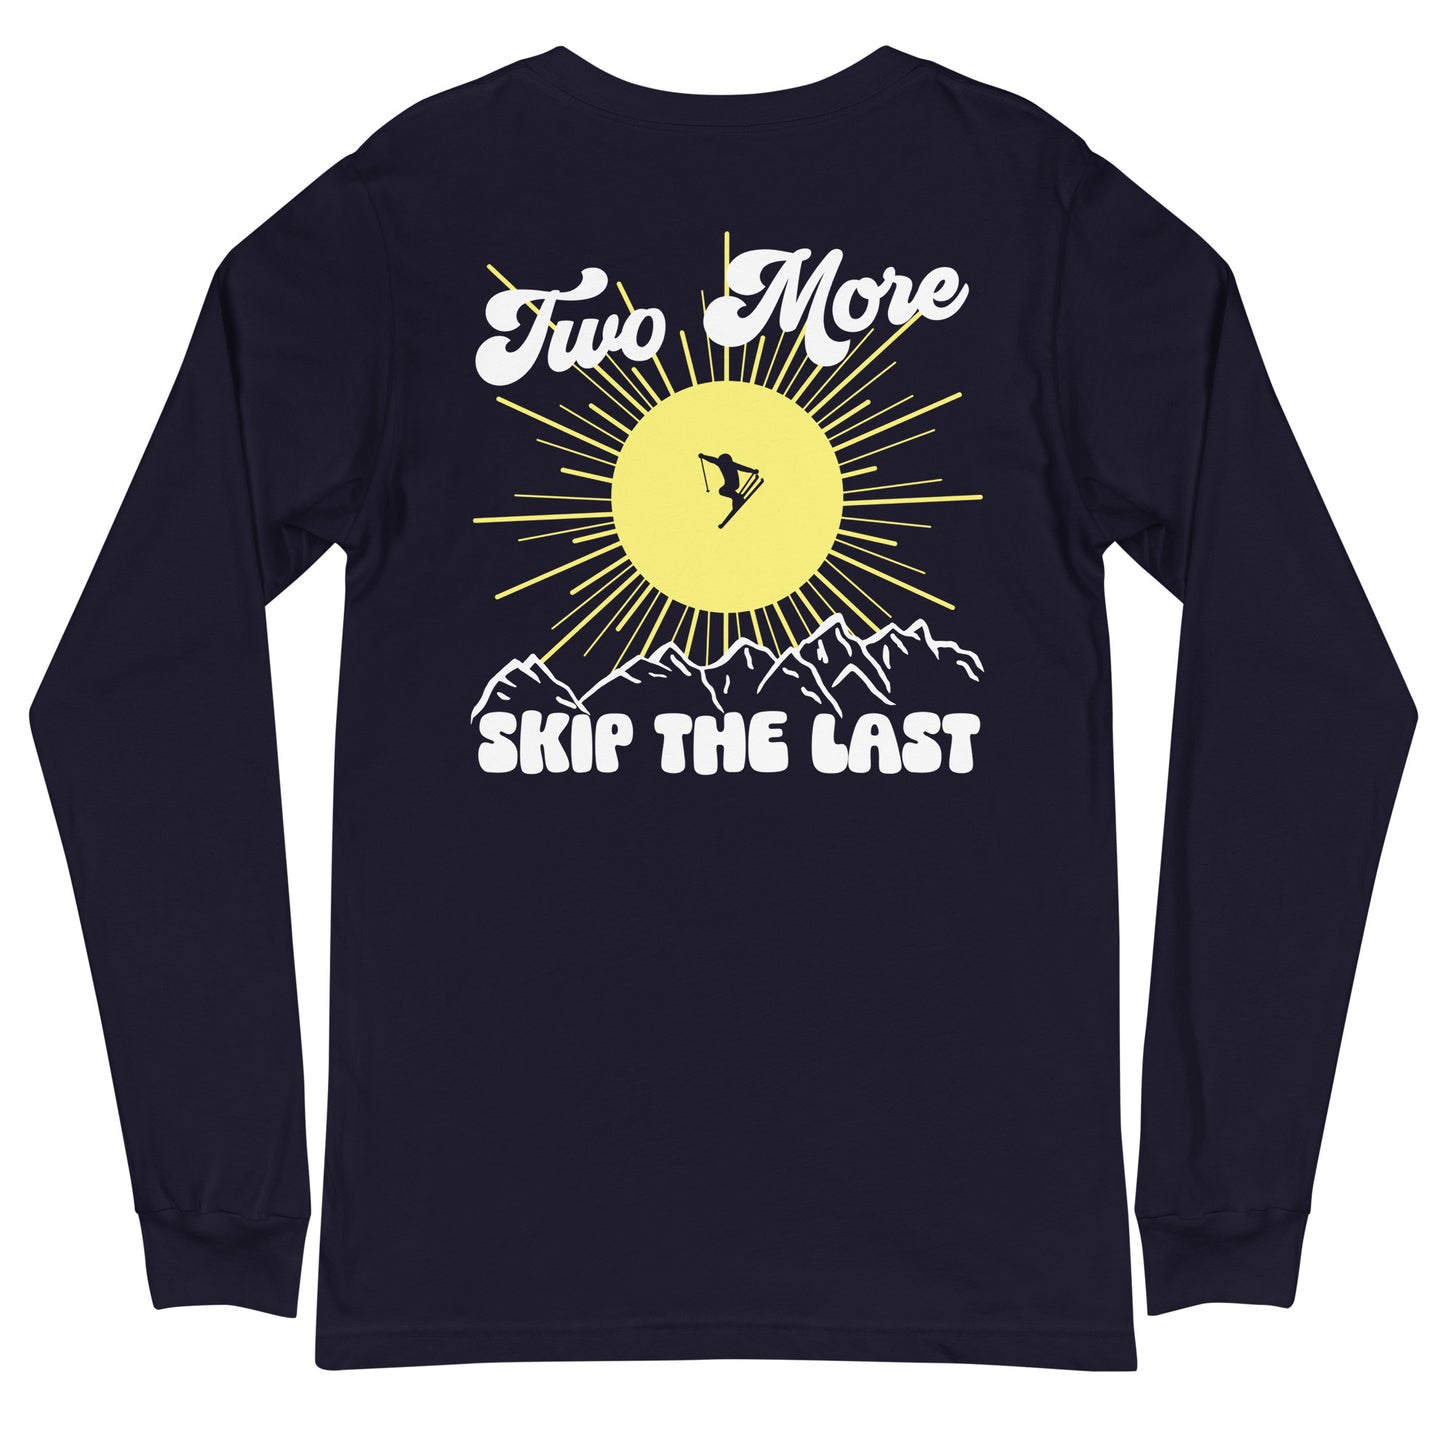 Two More Skip The Last "Bluebird" navy unisex Long sleeve t-shirt. Back view